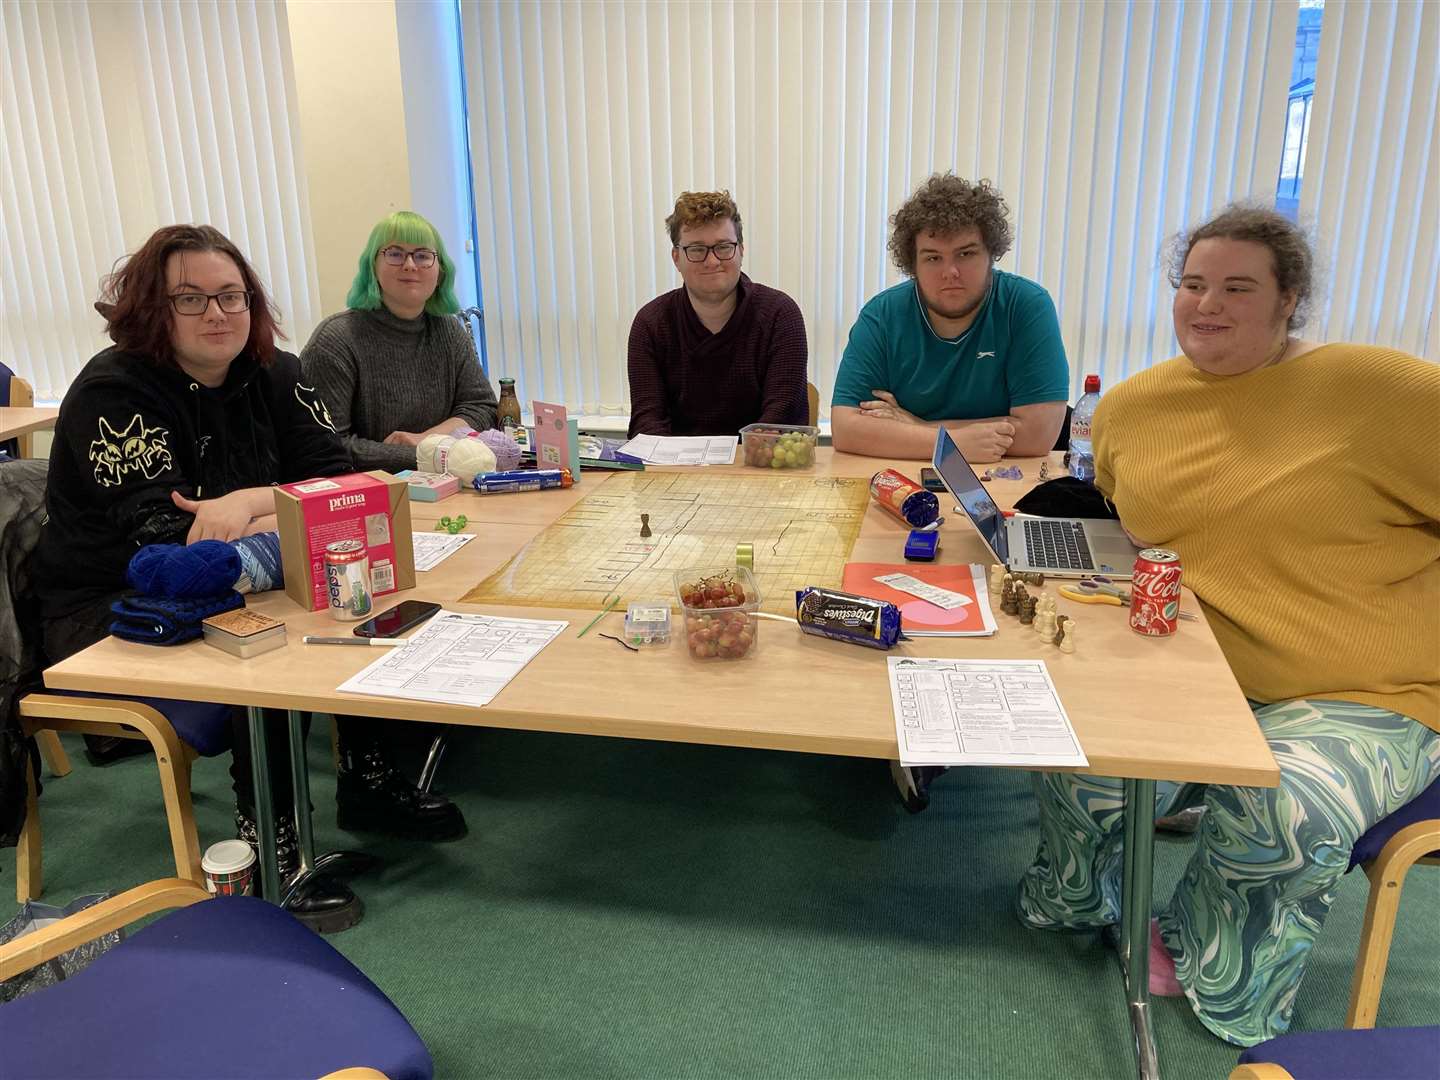 Safe Space Inverness have already been holding sessions at Eden Court, with big plans to grow in the future.